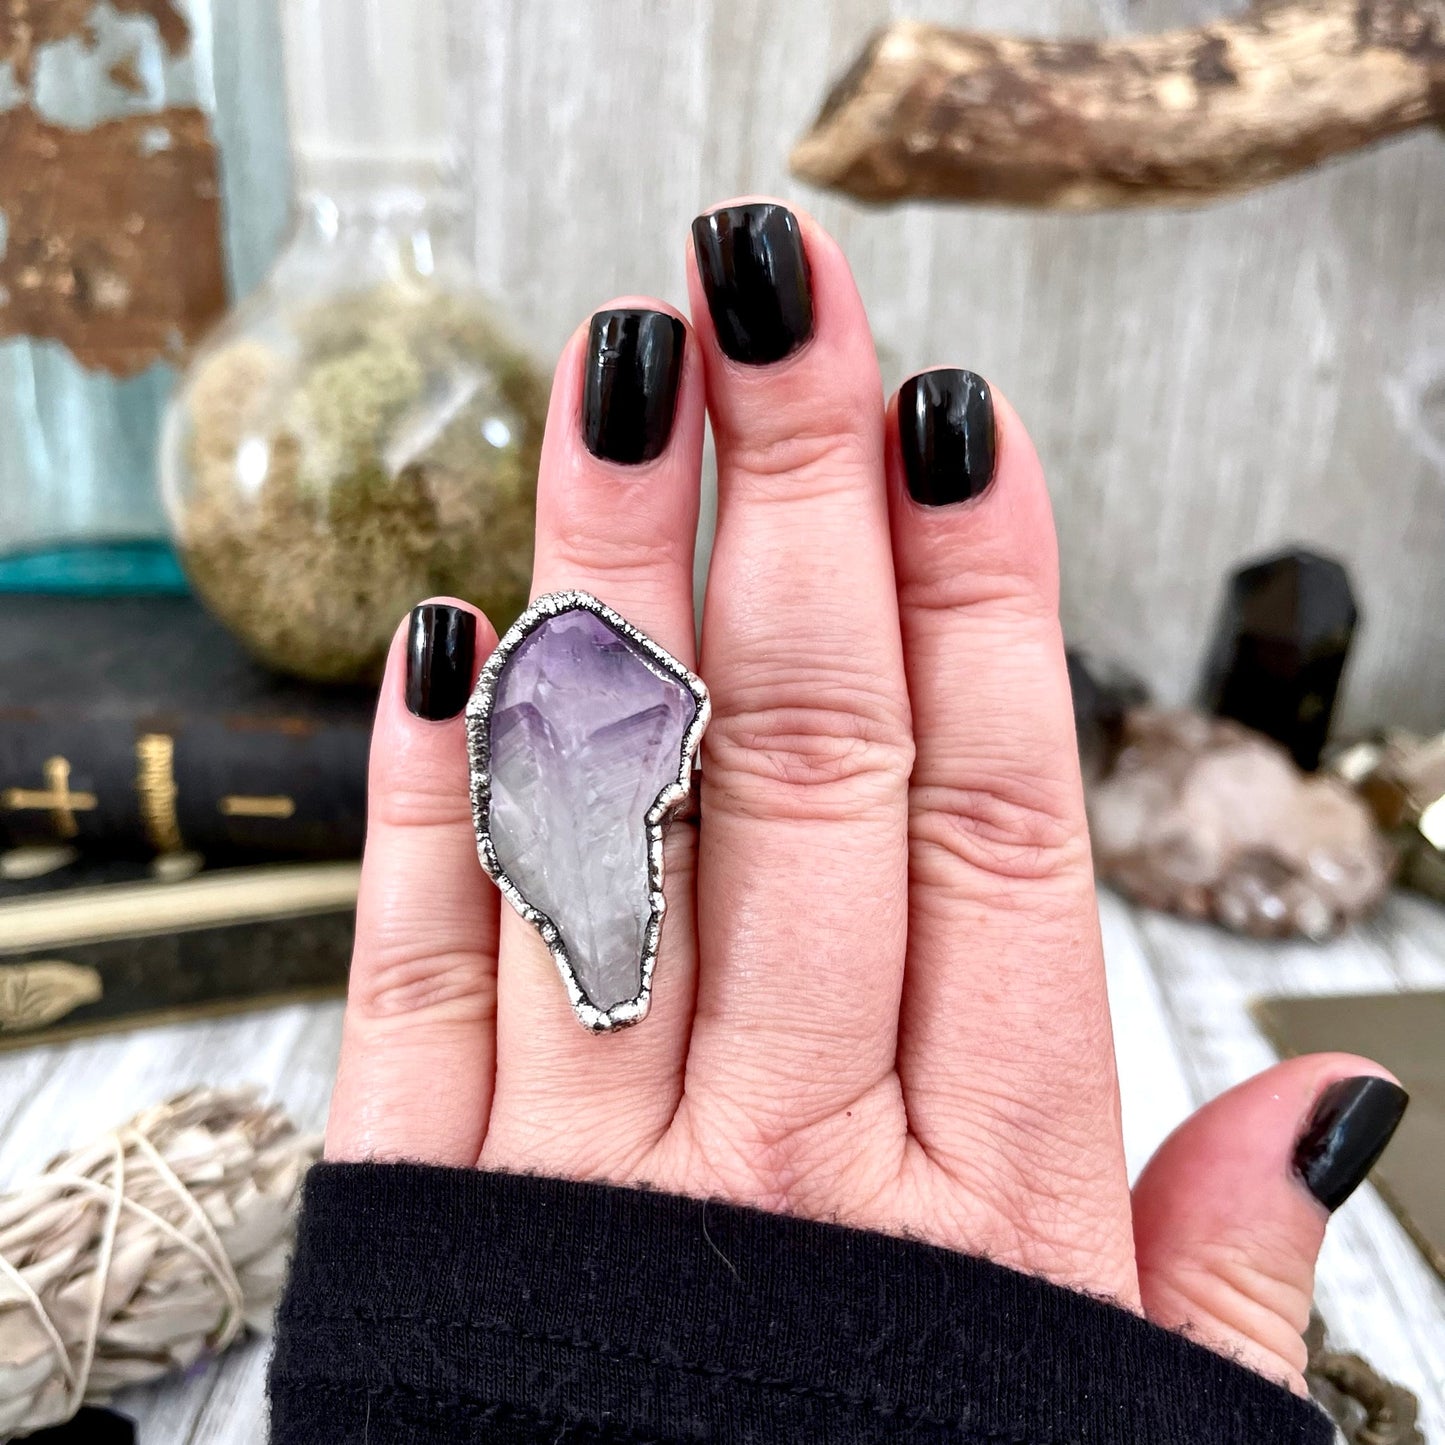 Size 6 Big Raw Amethyst Purple Crystal Ring in Fine Silver / Foxlark Collection - One of a Kind